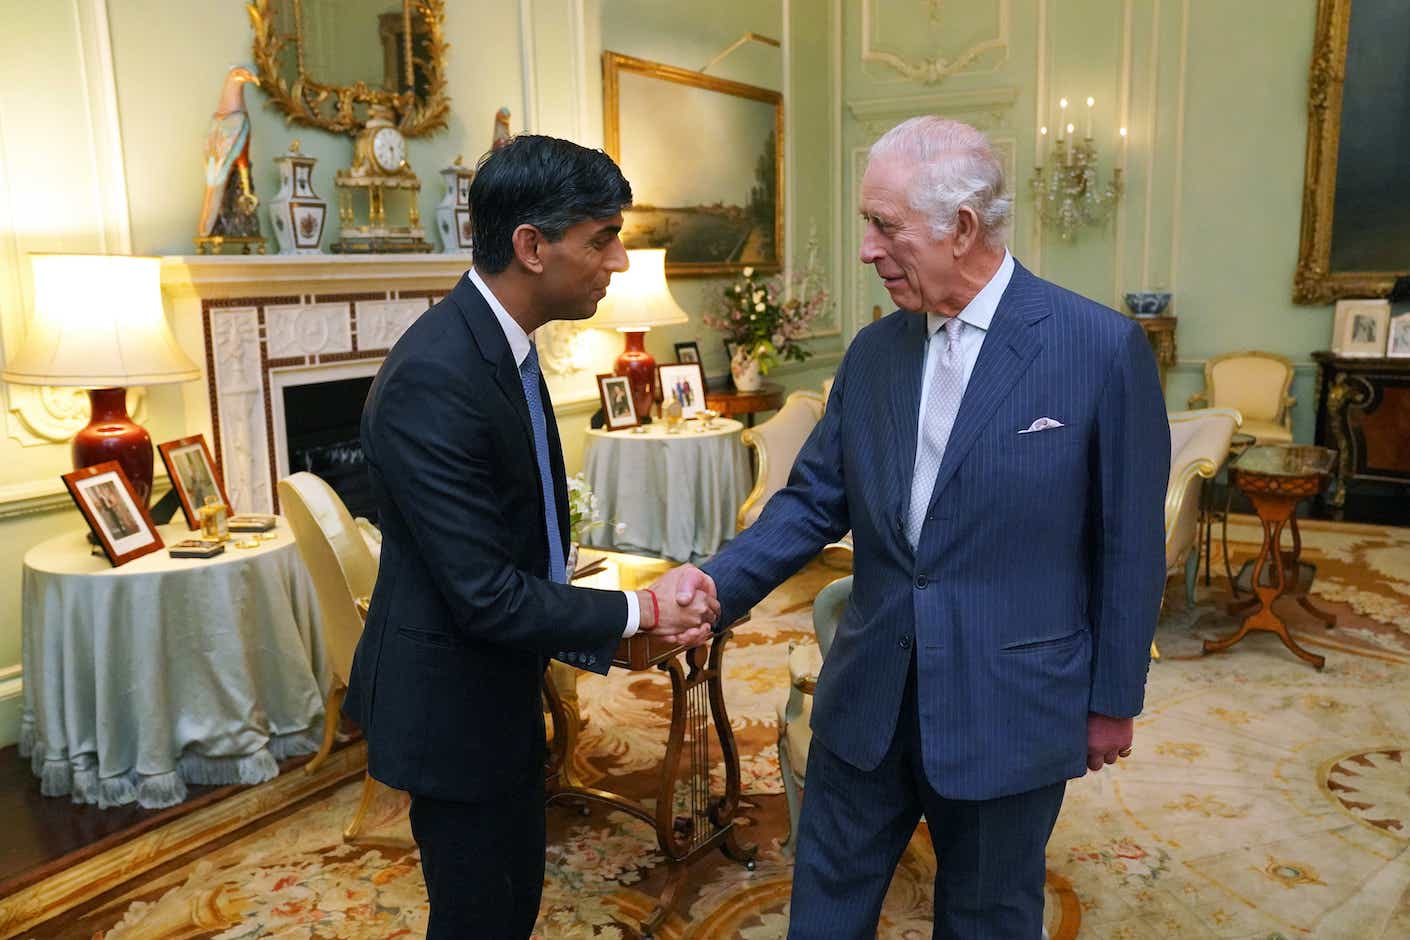 King Charles III with Prime Minister Rishi Sunak at Buckingham Palace, London, for their first in-person audience since the King's diagnosis with cancer.